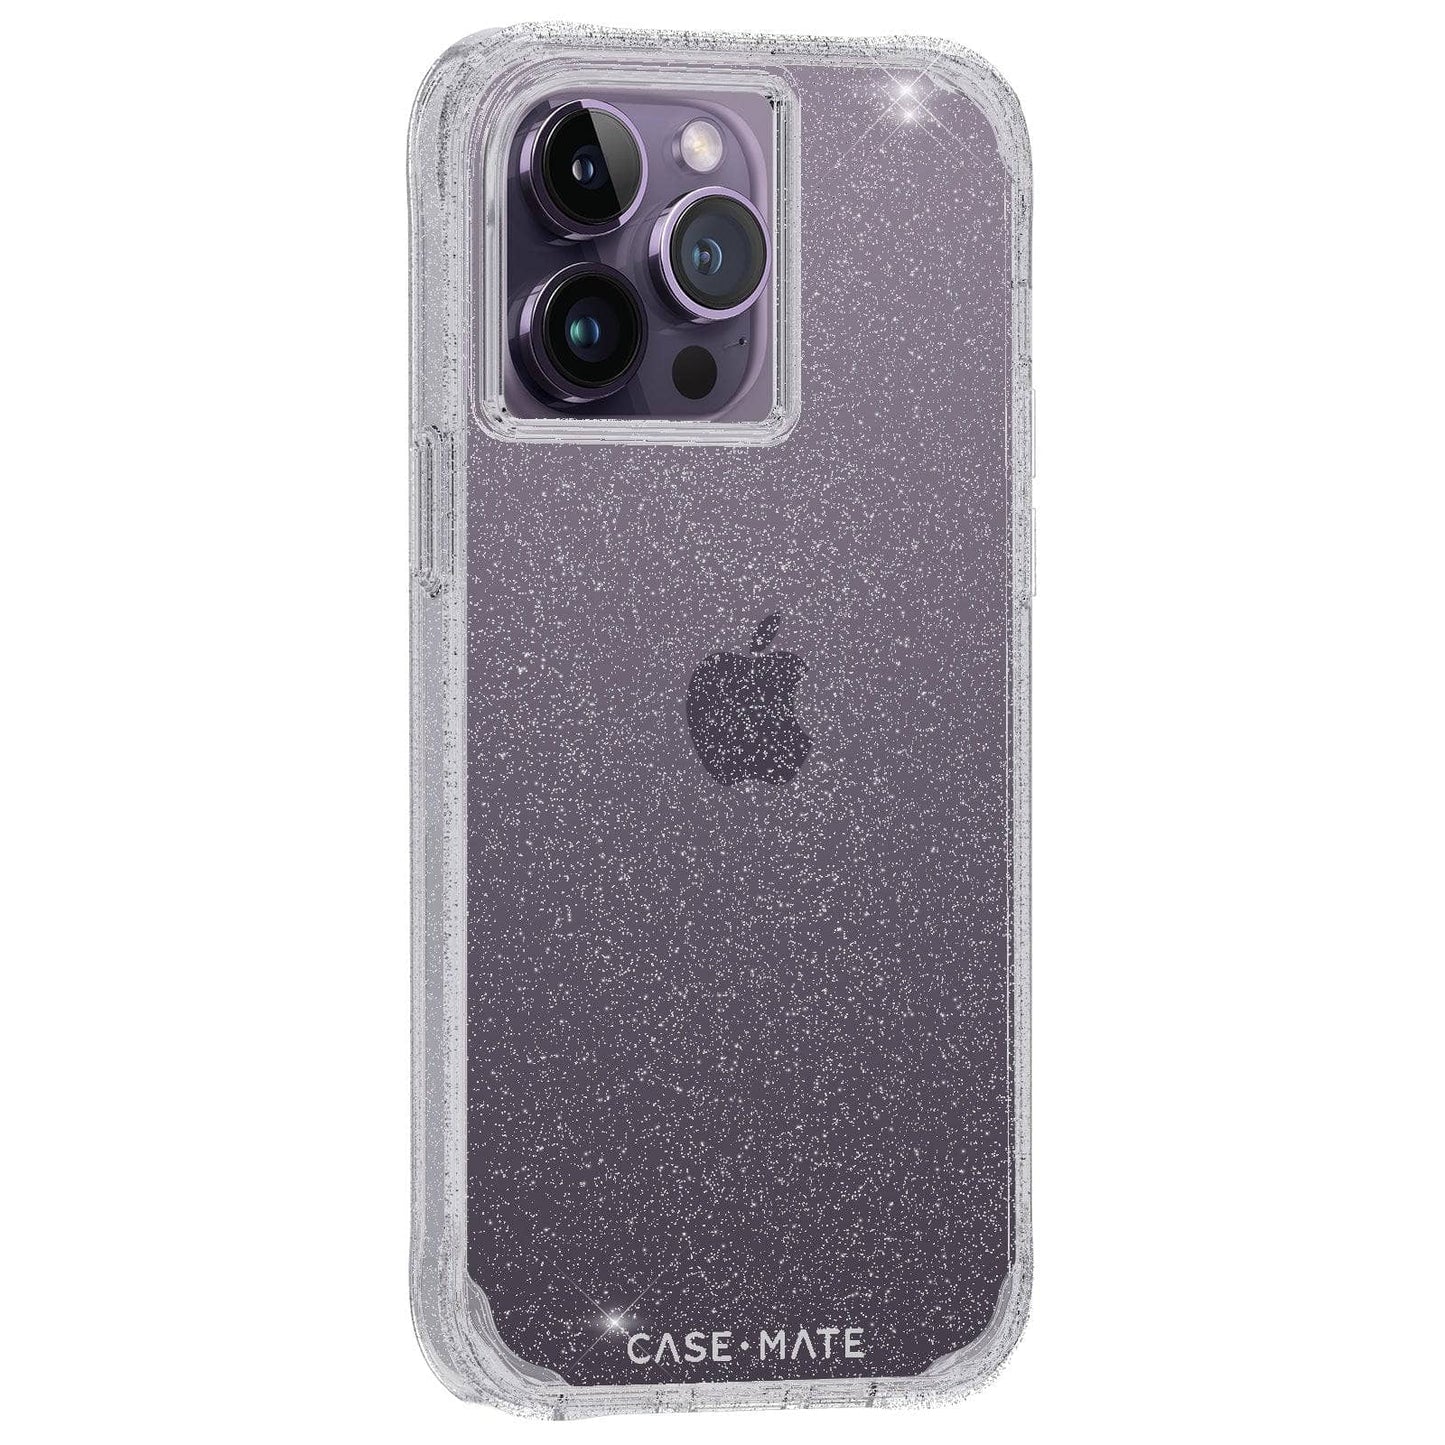 Case-Mate Sheer Crystal Case - For iPhone 14 Pro Max (6.7")-Cases - Cases-CASE-MATE-www.PhoneGuy.com.au